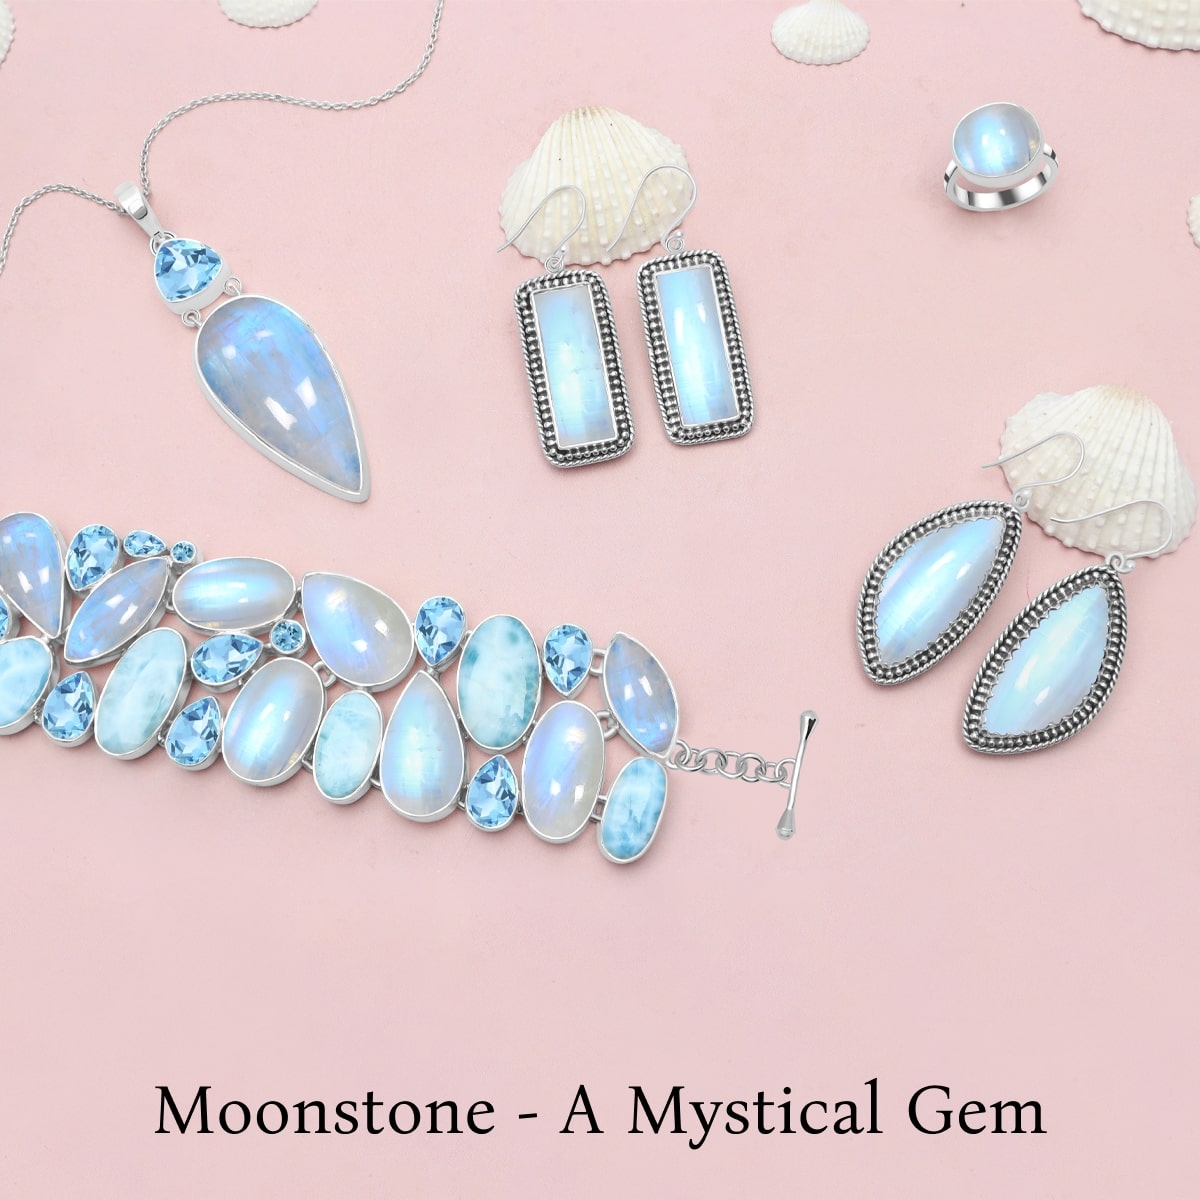 What is a Moonstone?